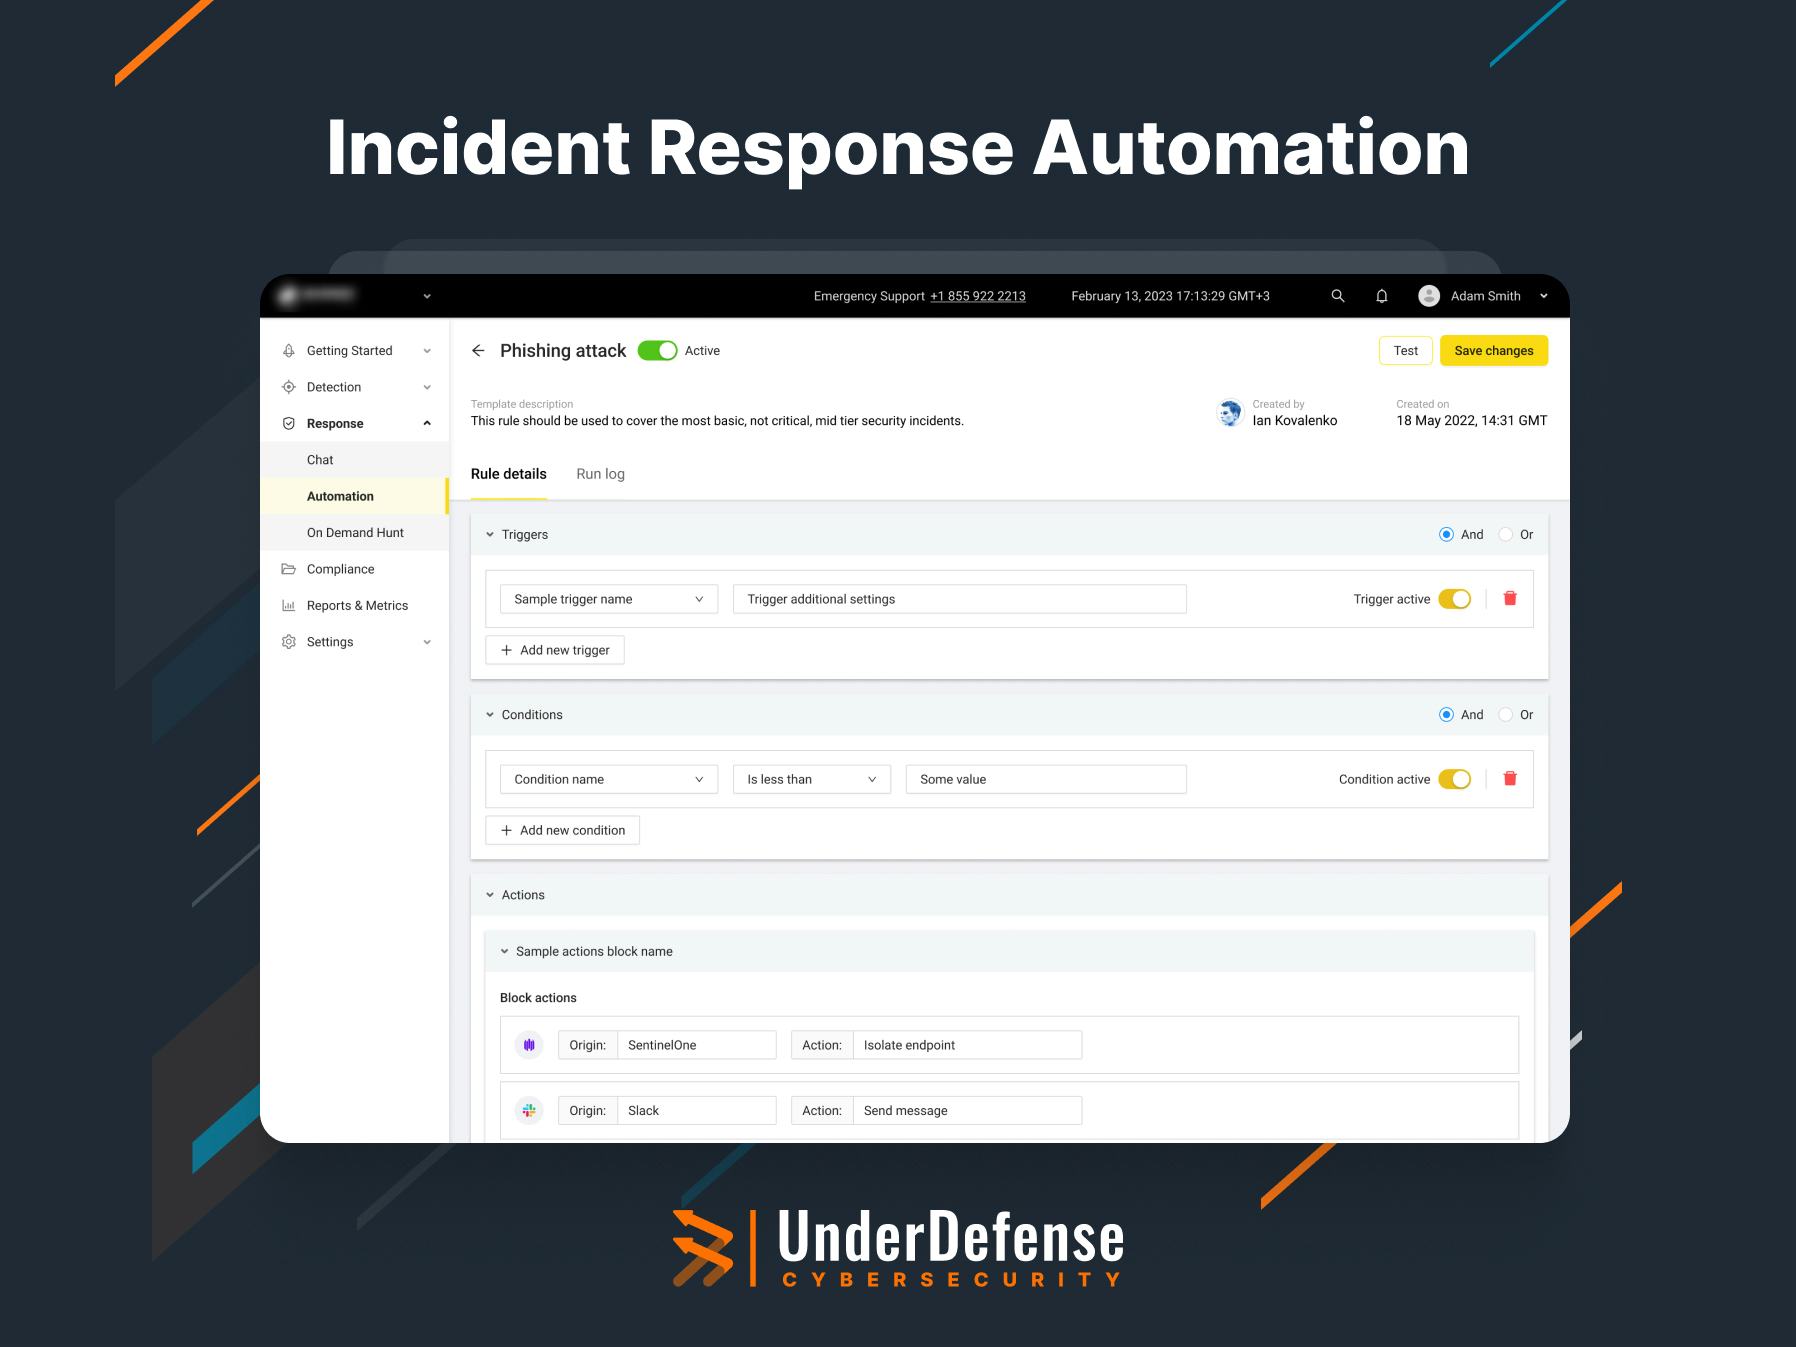 UnderDefense MAXI Software - Automate incident response or collaborate with experts. Simplify your security incident management process effortlessly.